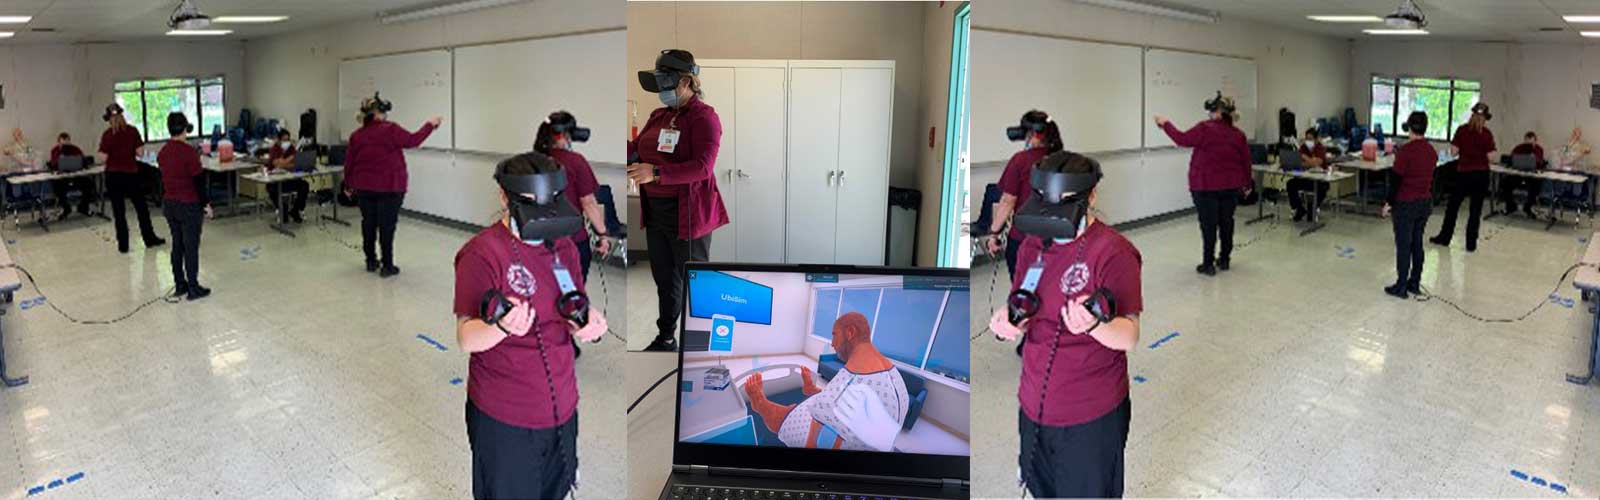 nurses in training using the virtual software to enhance their clinical experience